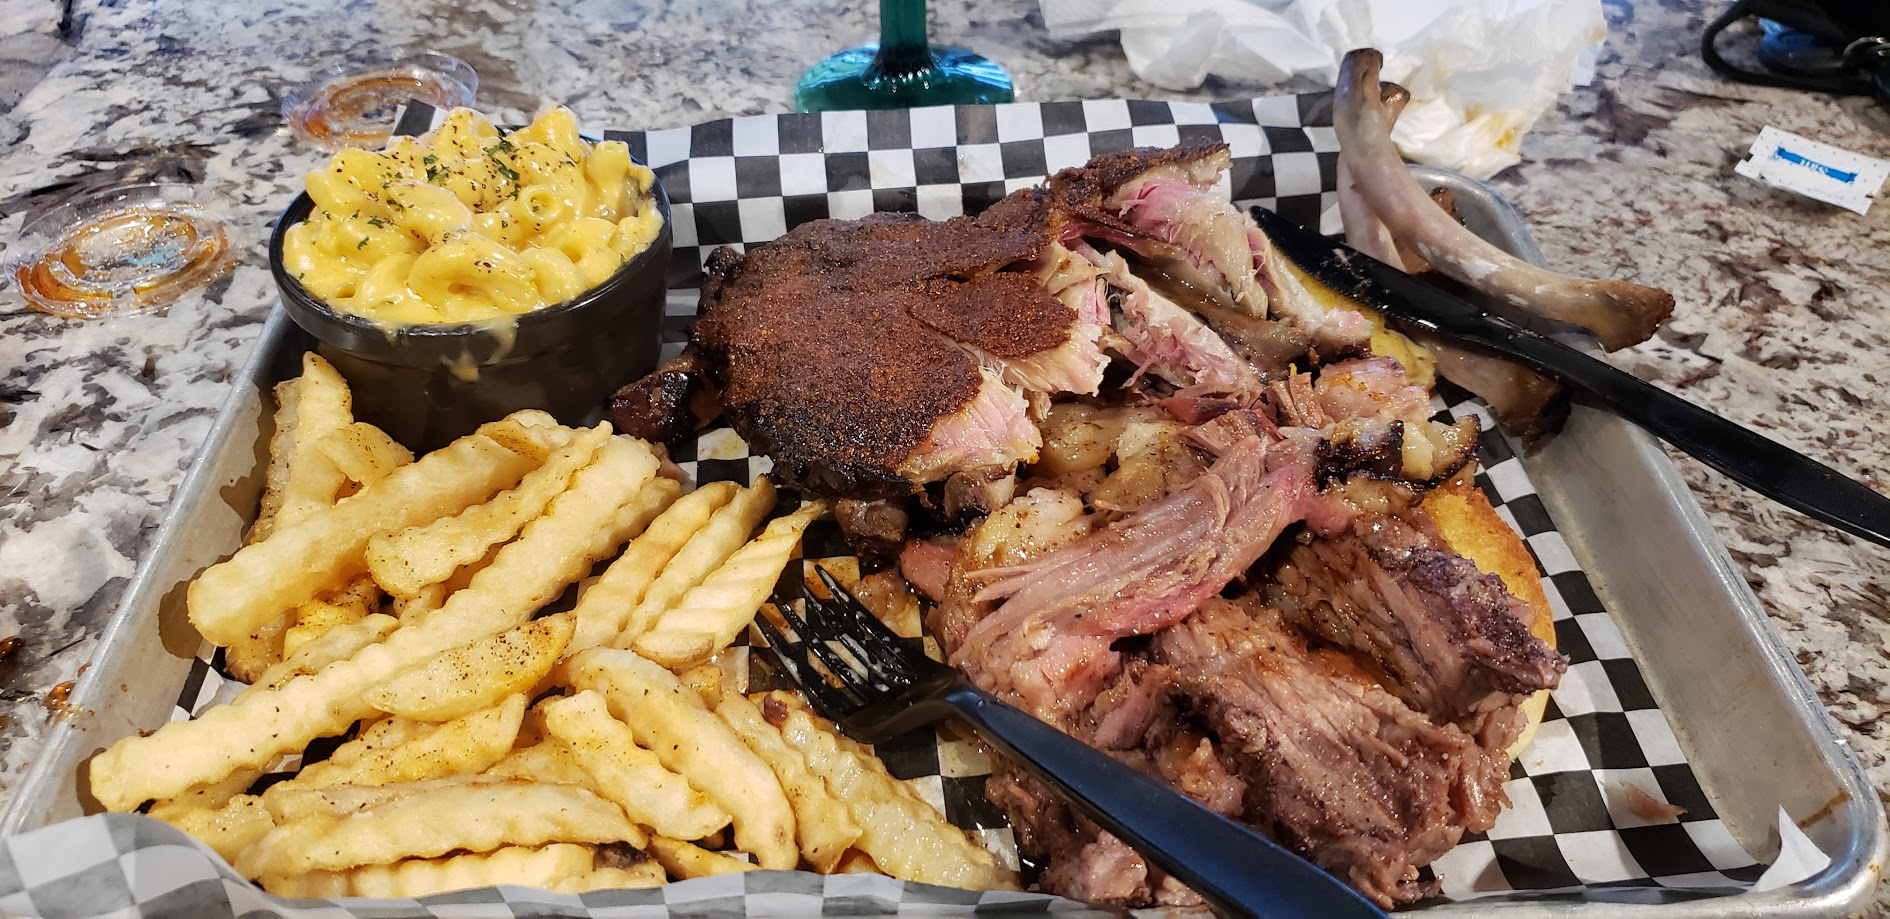 West Alley BBQ & Smokehouse